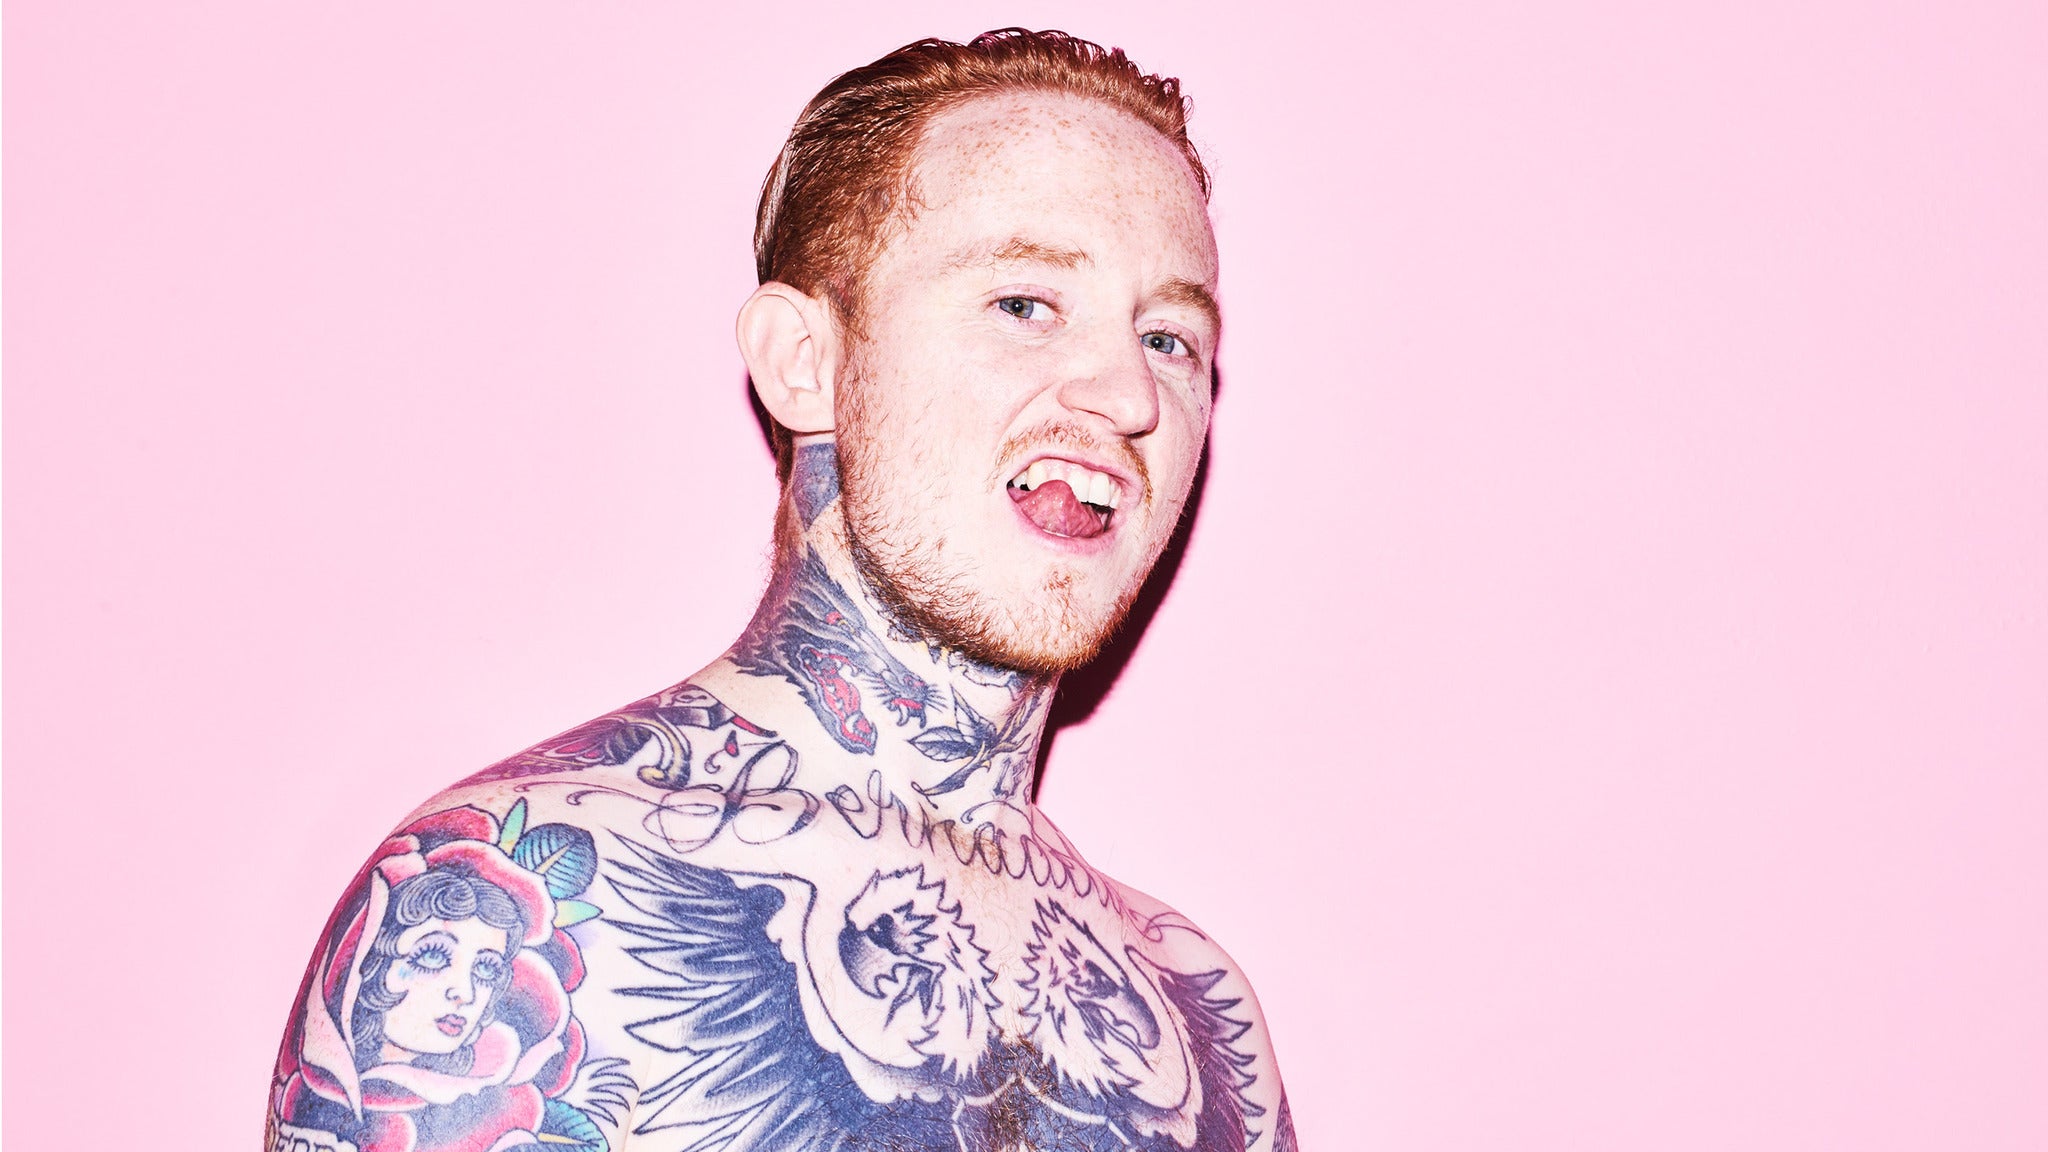 Frank Carter & The Rattlesnakes at Fibbers, York 23/02/2019 [Live Review]